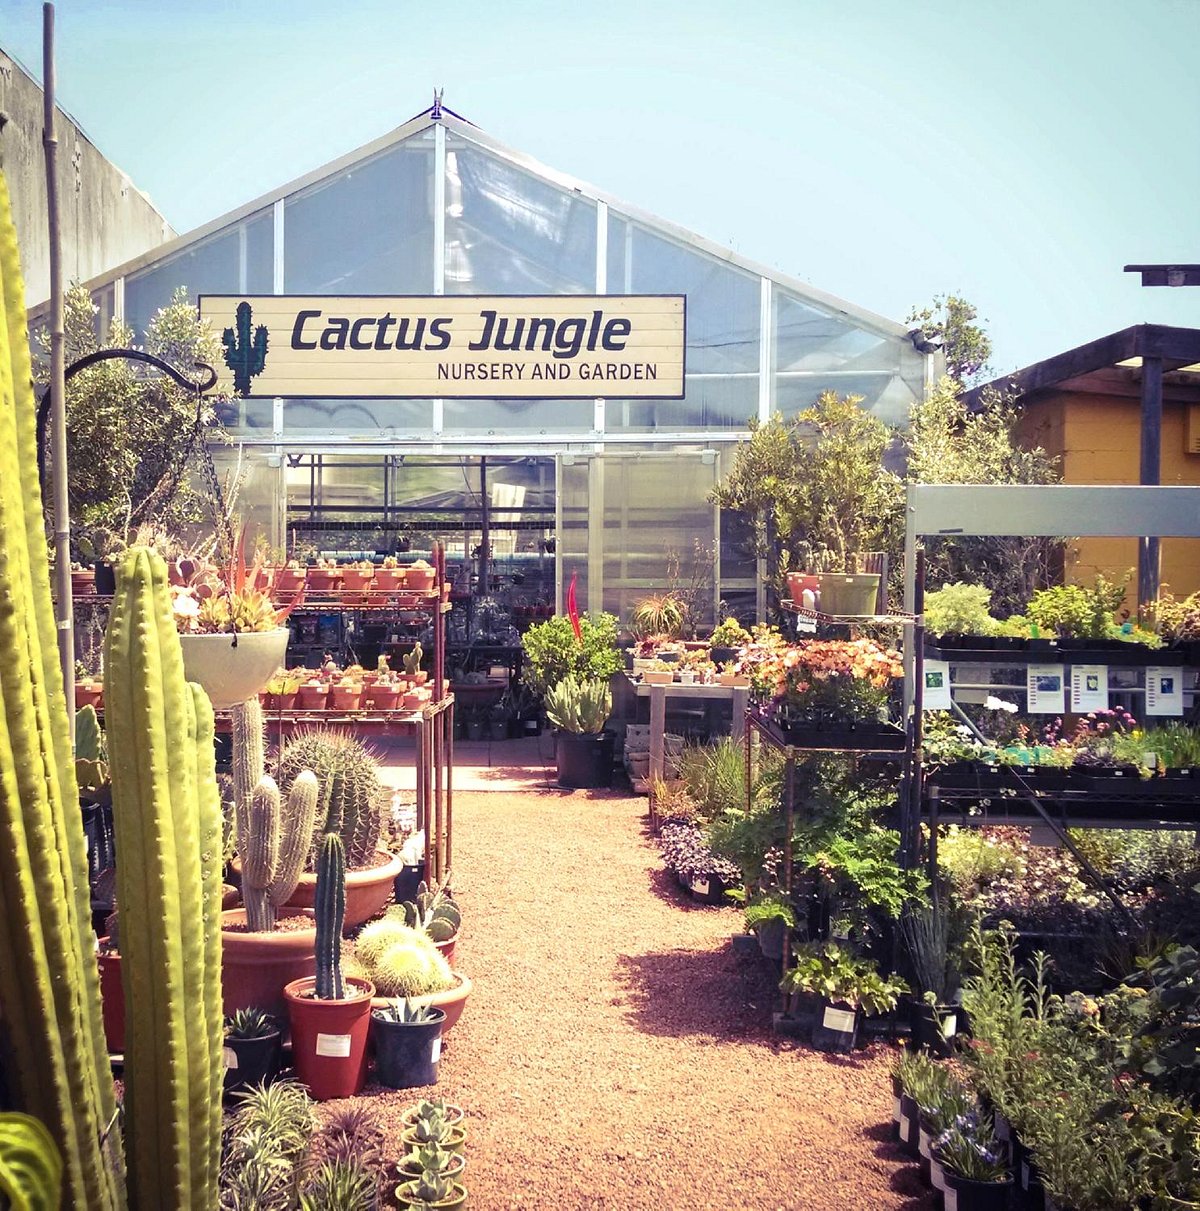 Cactus Jungle Berkeley - 2021 All You Need To Know Before You Go Tours Tickets With Photos - Tripadvisor